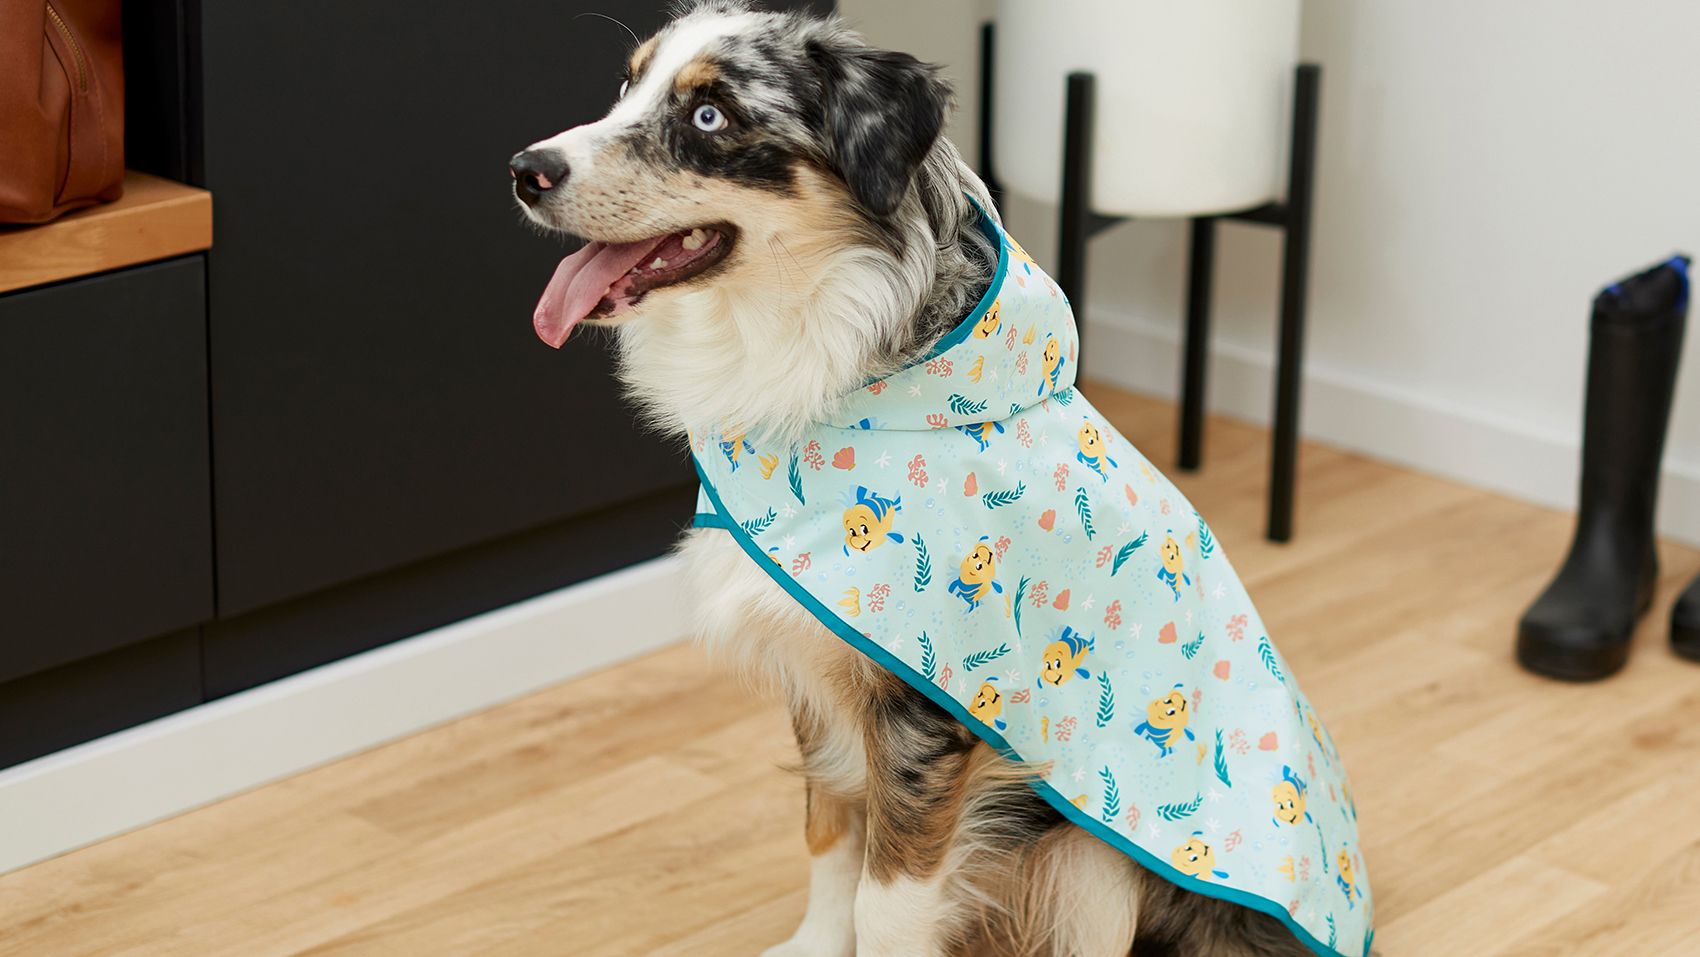 Raincoats For Dogs